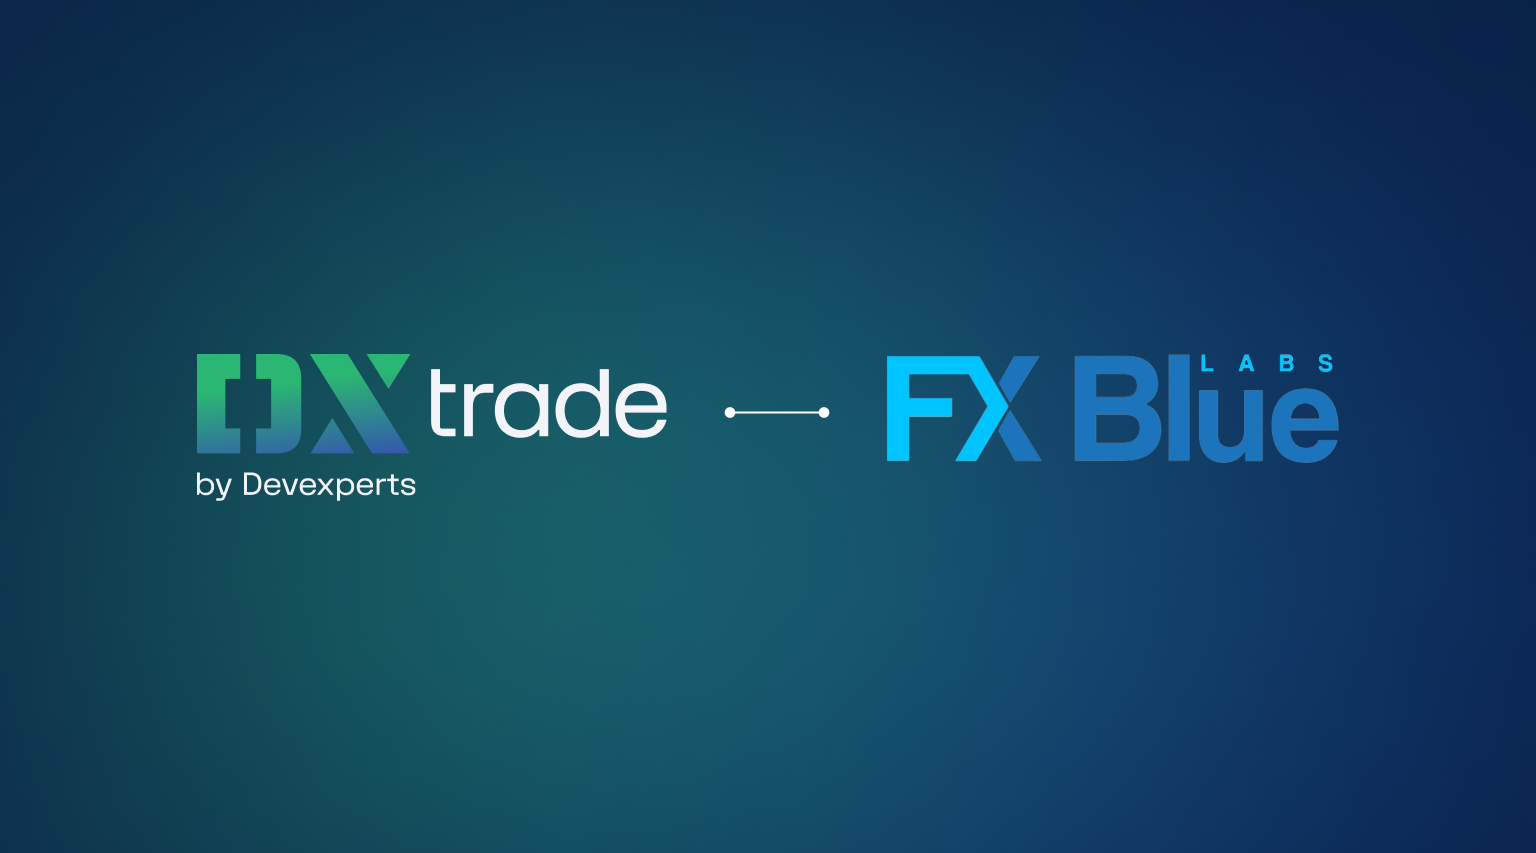 Devexperts and FX Blue Partner to Offer Brokers a Turnkey Trading Solution